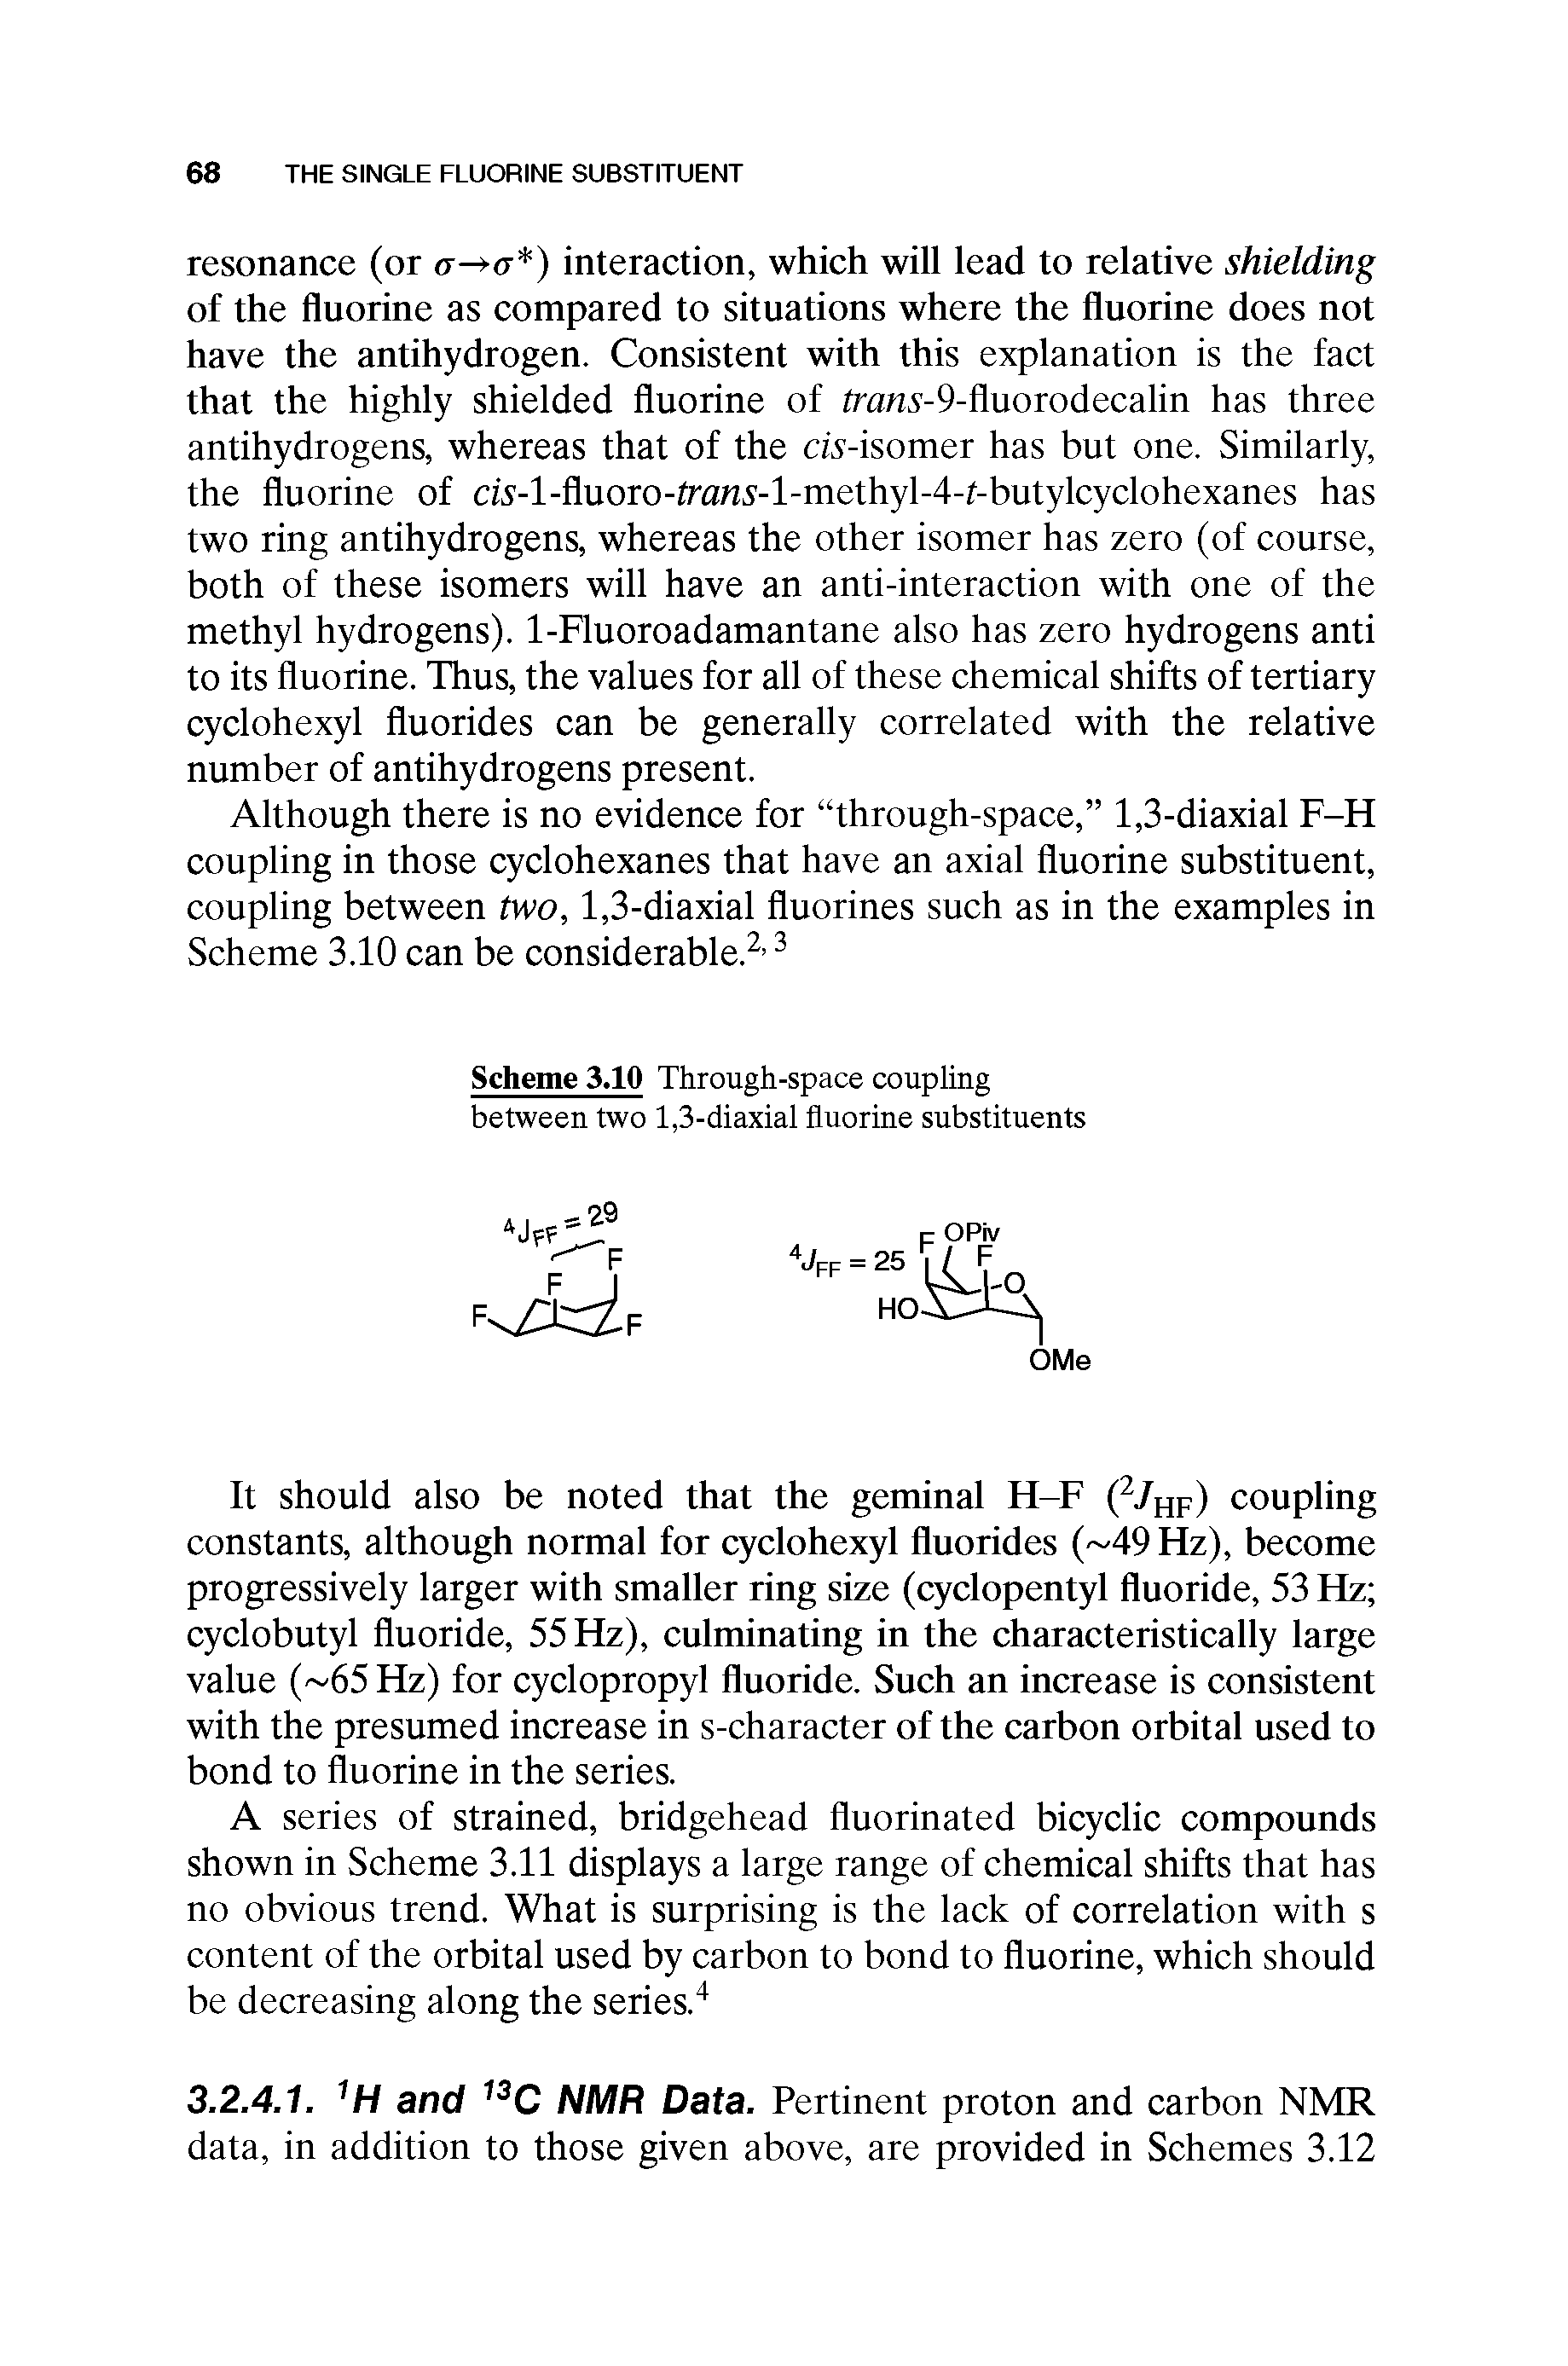 Scheme 3.10 Through-space coupling between two 1,3-diaxial fluorine substituents...